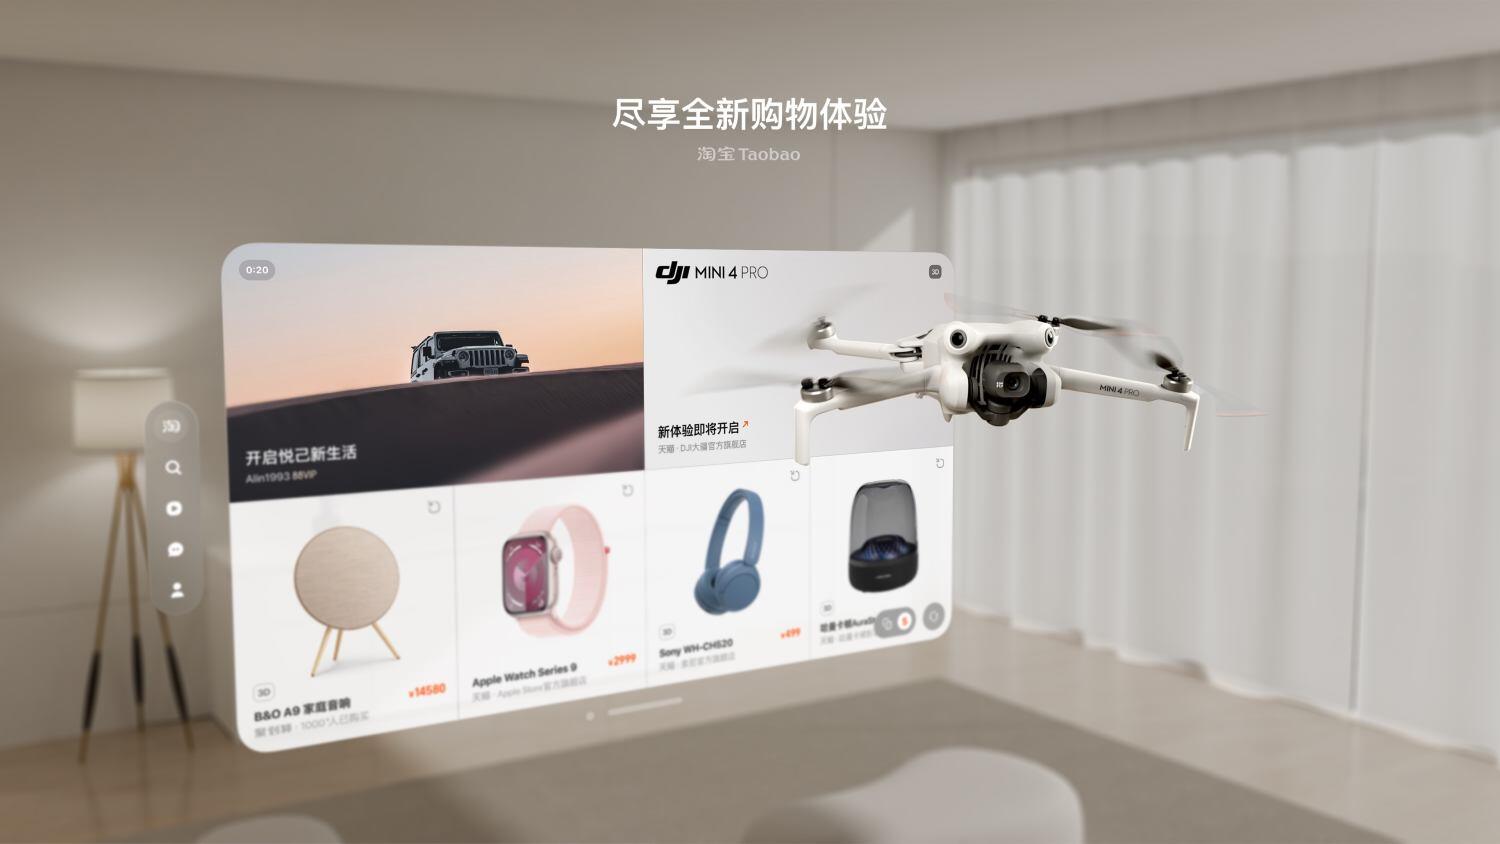 Drone flying out of an e-commerce screen display in a living room 